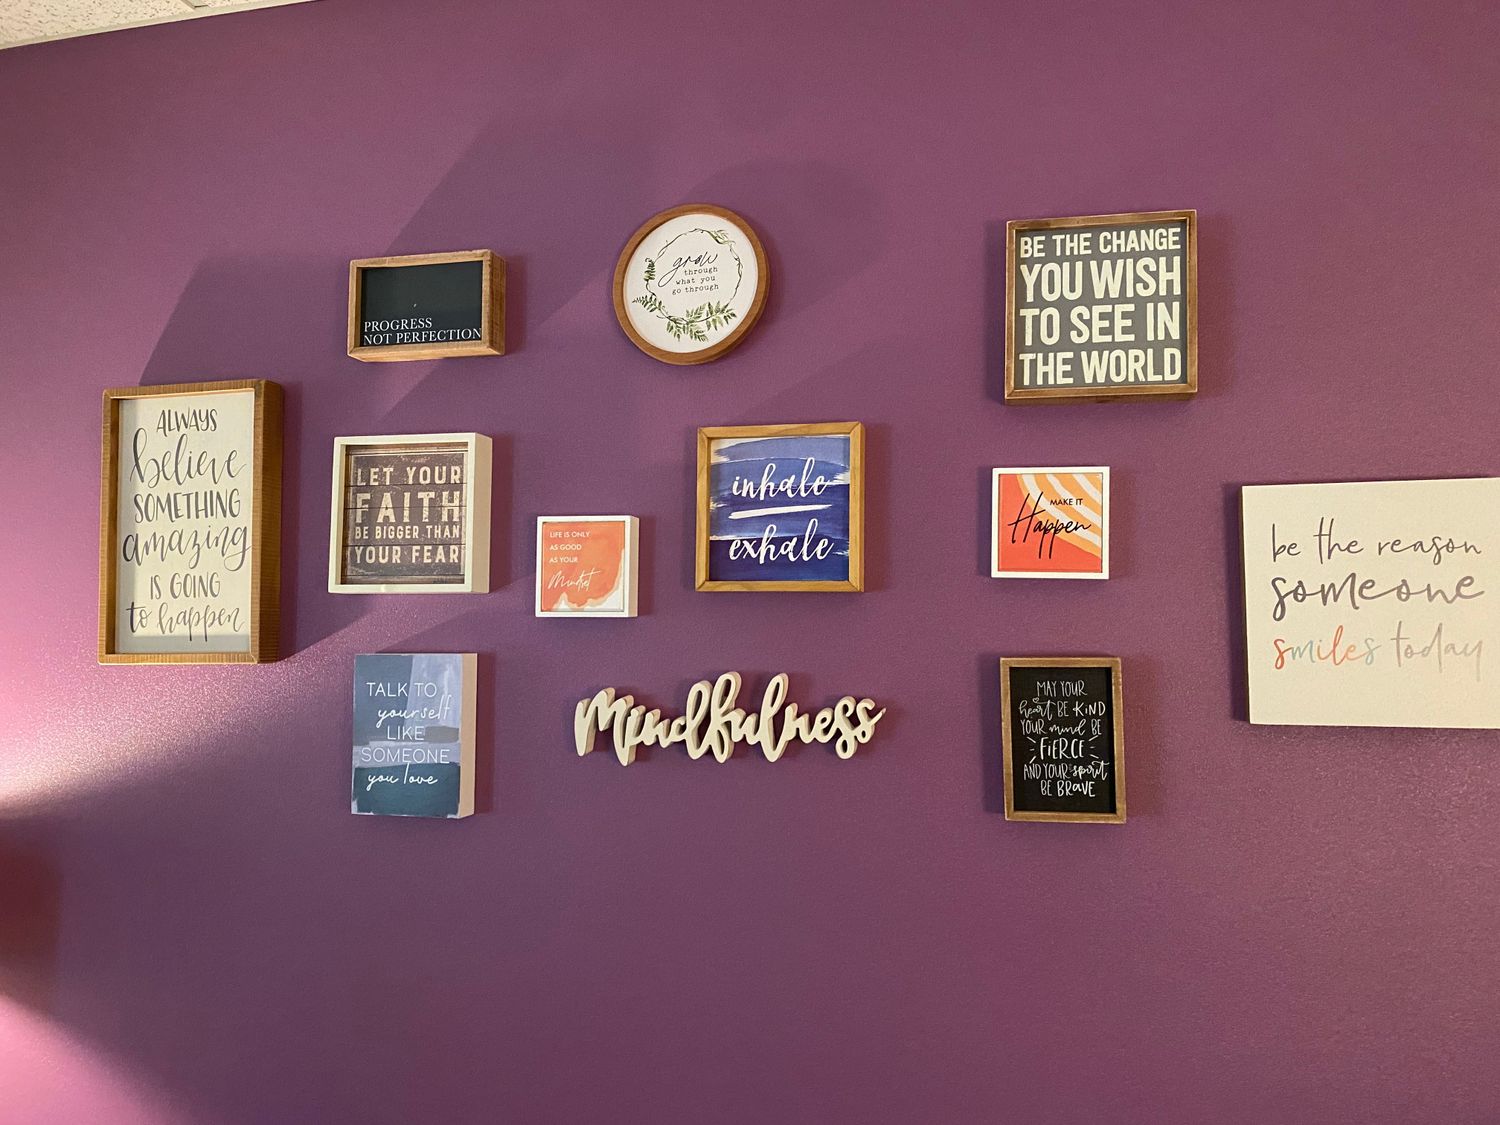 Gallery Photo of Inspiration wall
